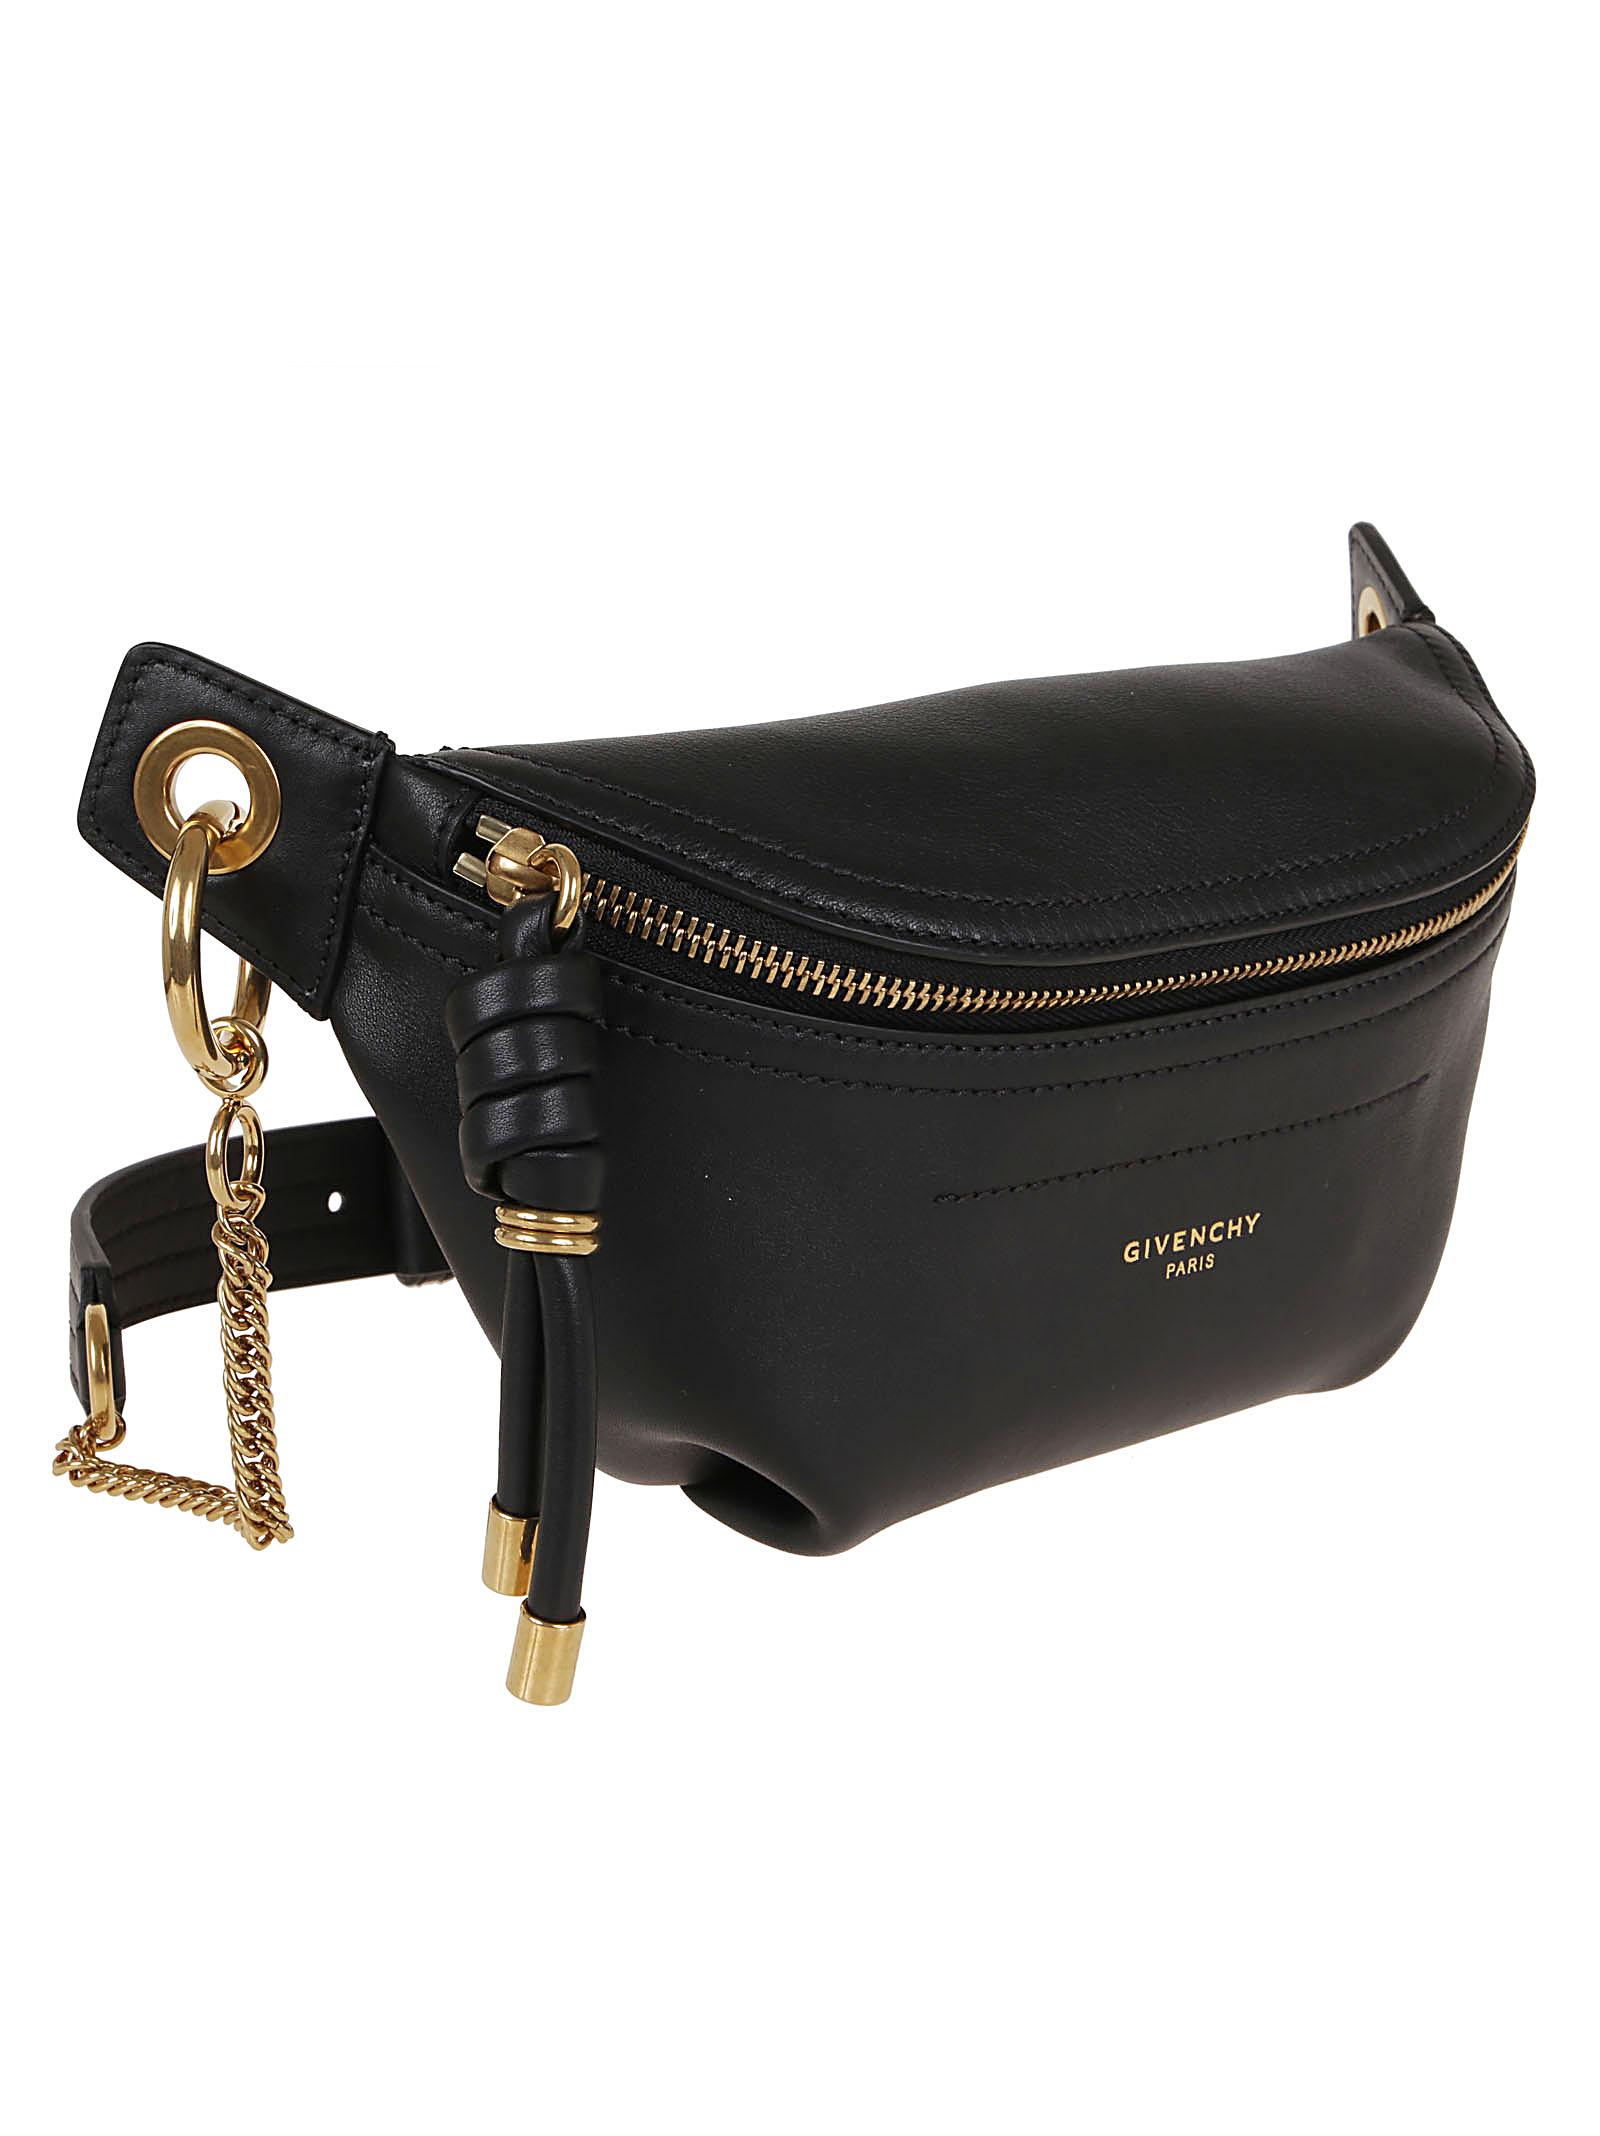 Givenchy Leather Whip Belt Bag Mini in Black - Lyst